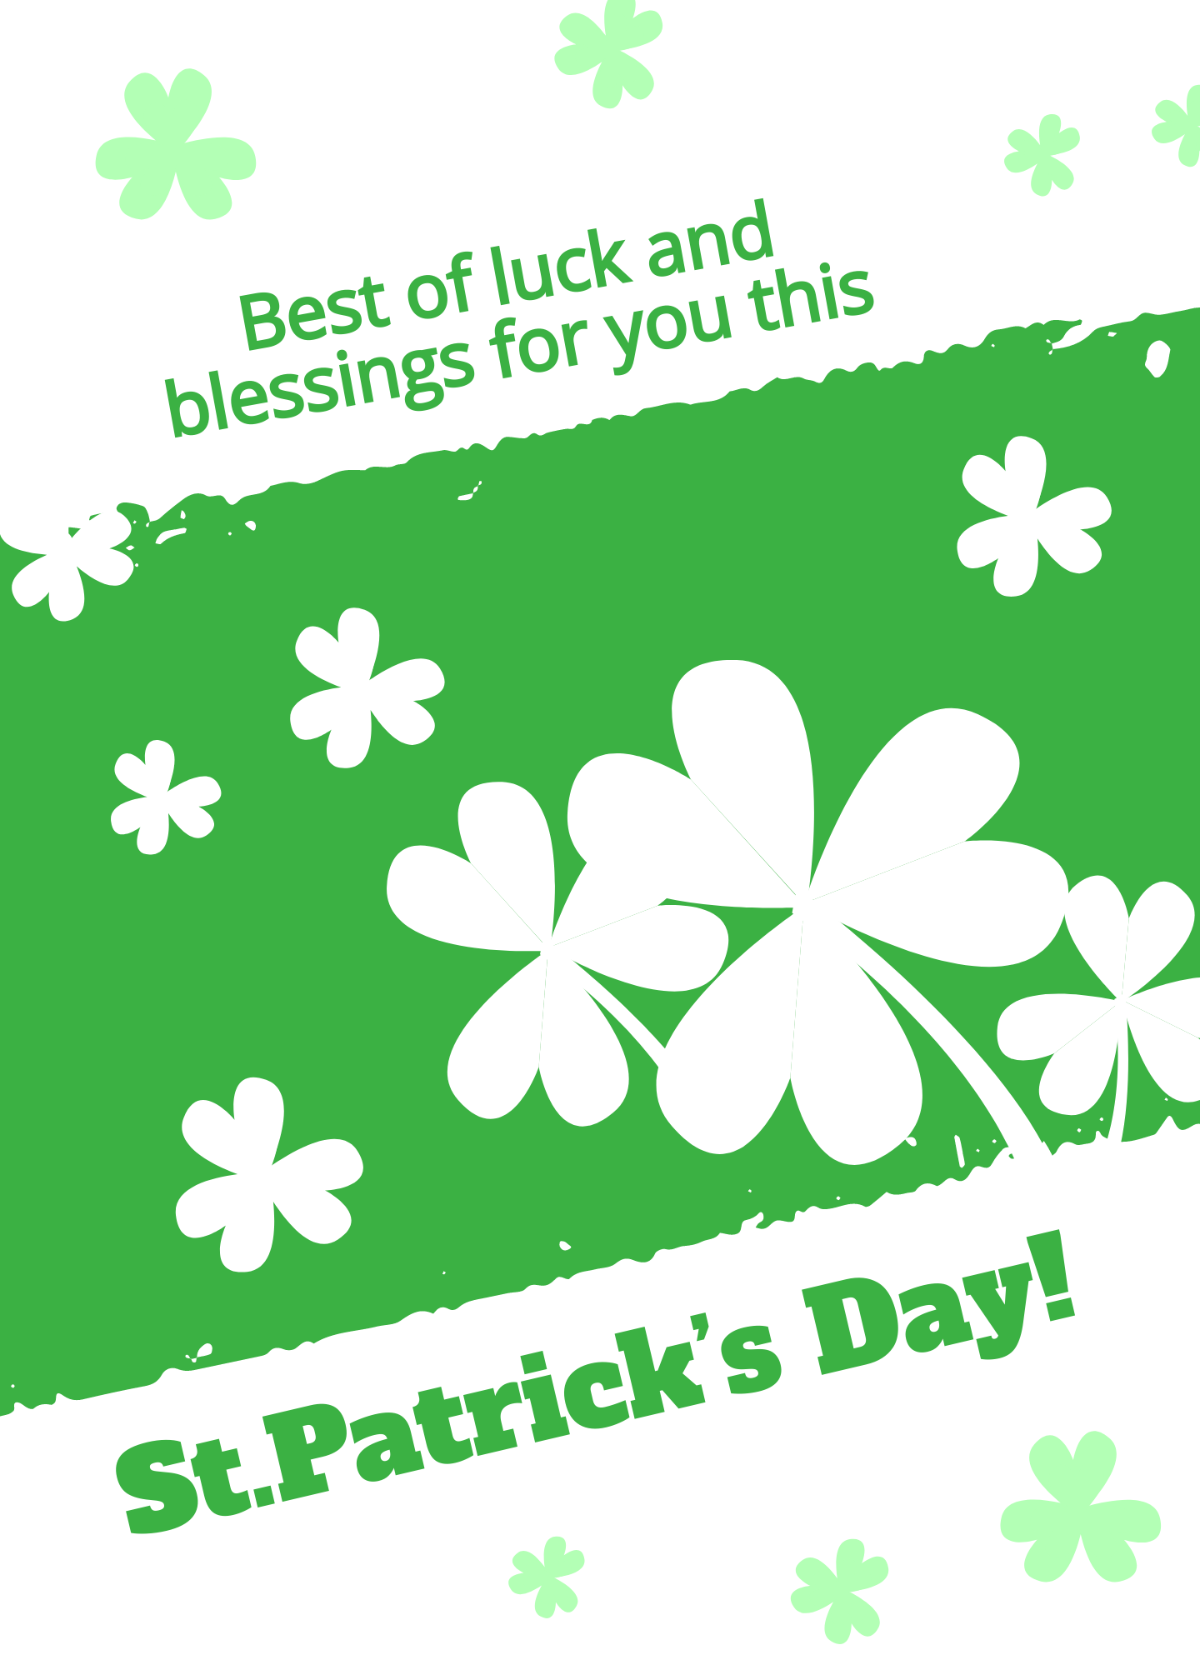 Free St. Patrick's Day Best Wishes Template